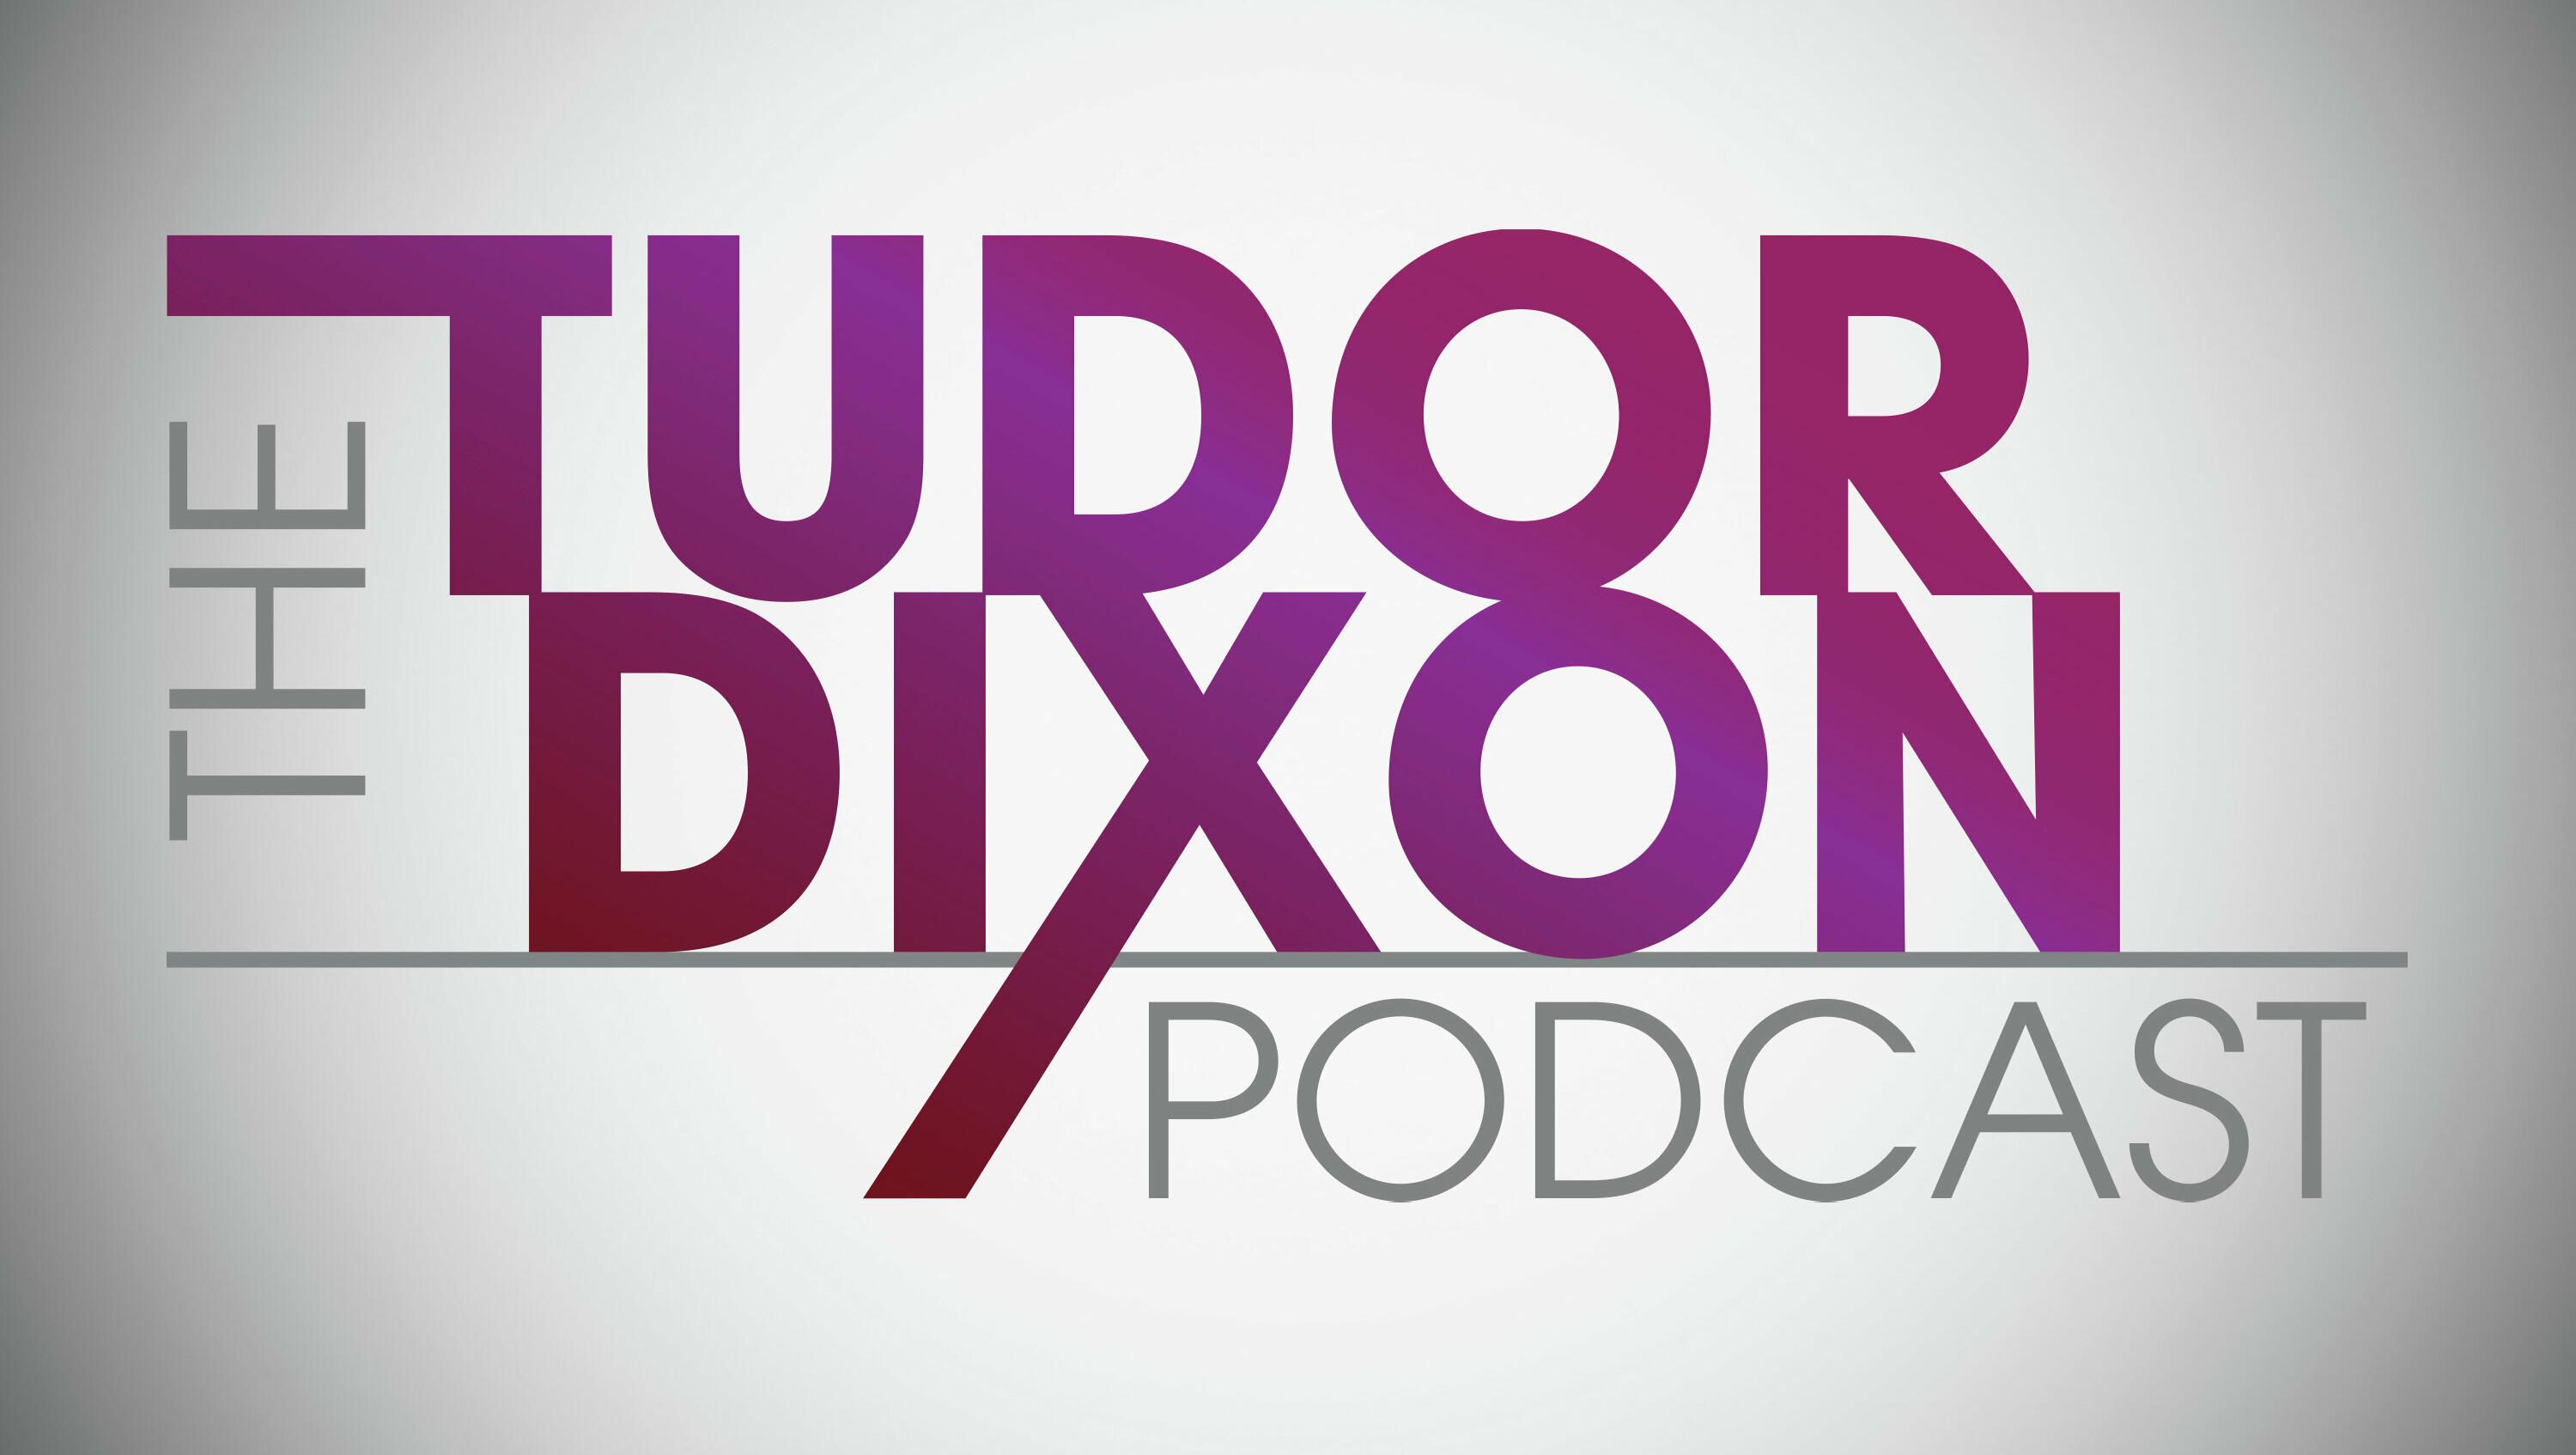 The Tudor Dixon Podcast: The Confusion and Intentional Complexity of the Tr